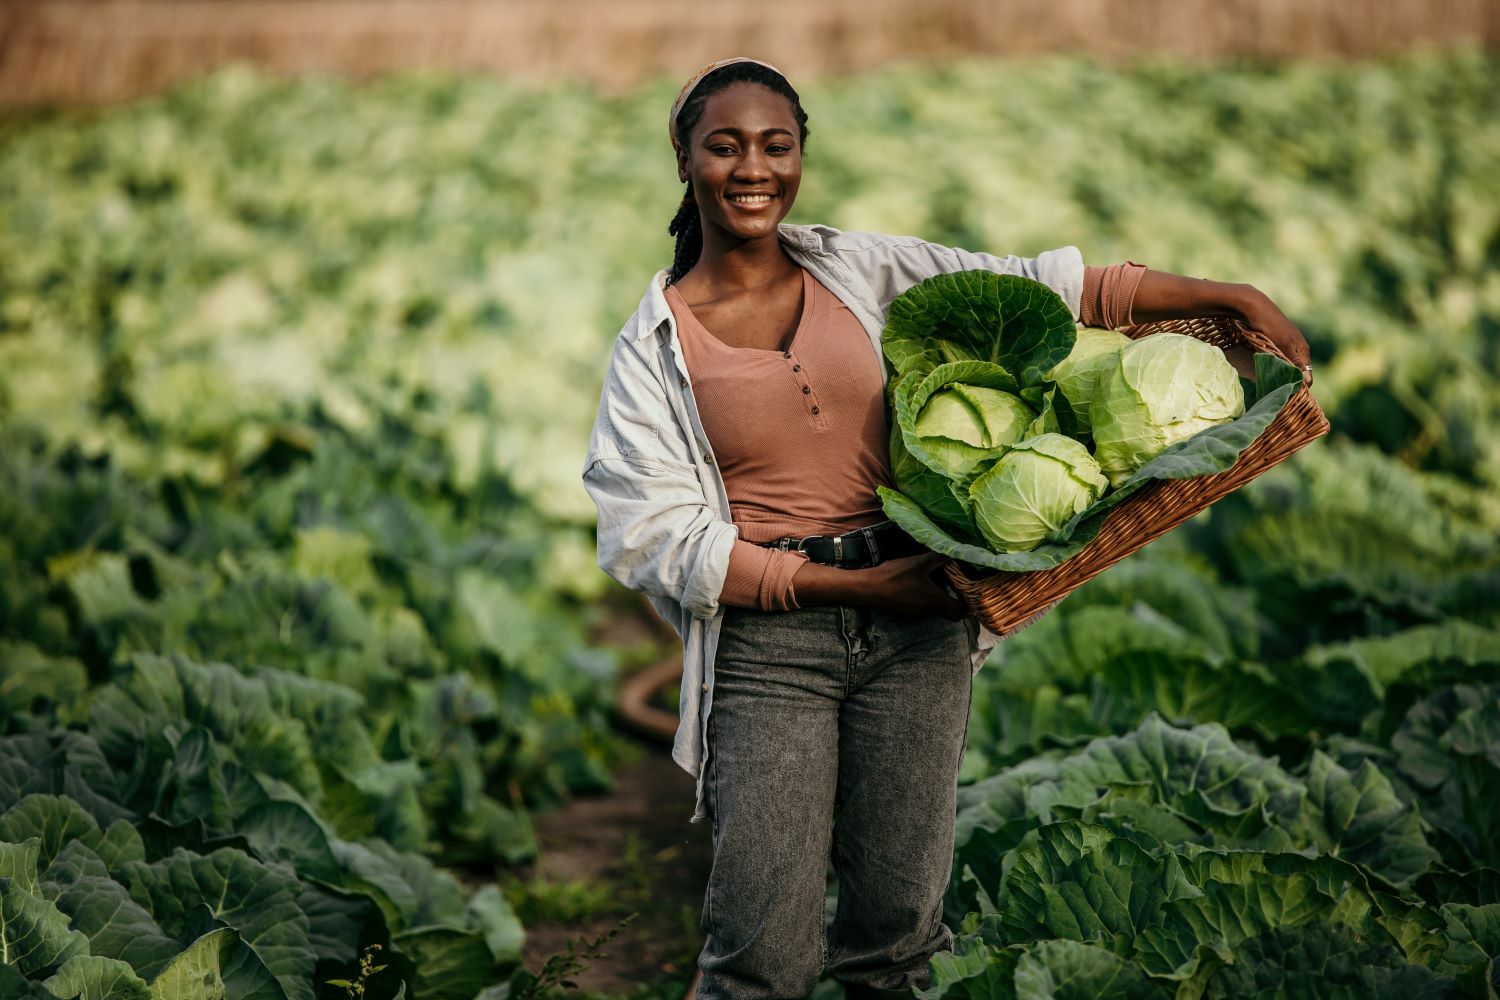 Women in Agrifood Systems